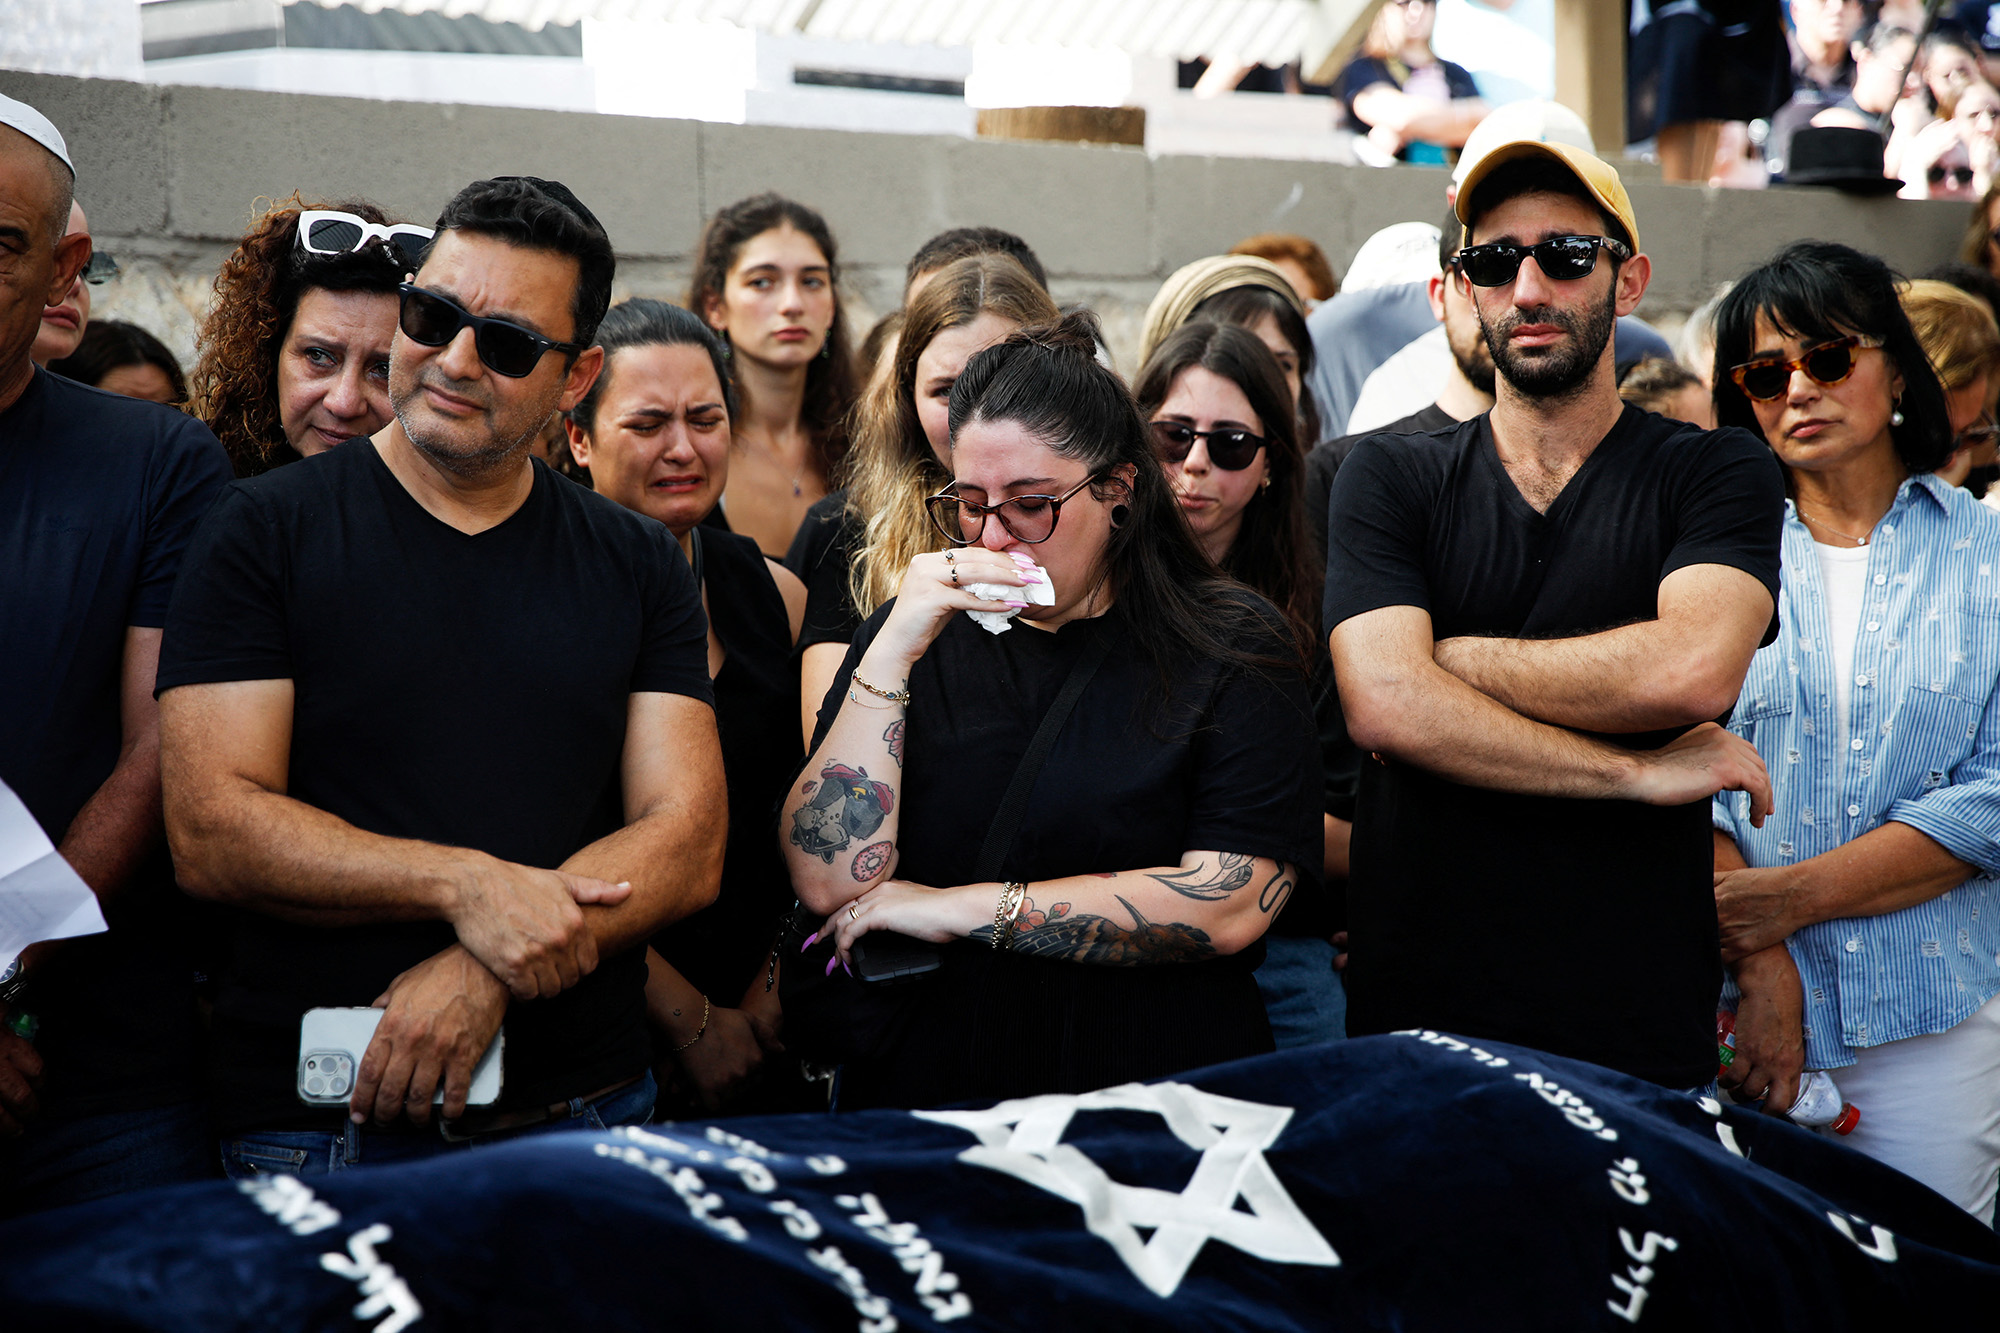 Family and friends mourn Danielle, 25, and Noam, 26, an Israeli couple who were killed in a deadly attack as they attended a festival, as they are buried next to each other at their funeral in Kiryat Tivon, Israel, on October 12.